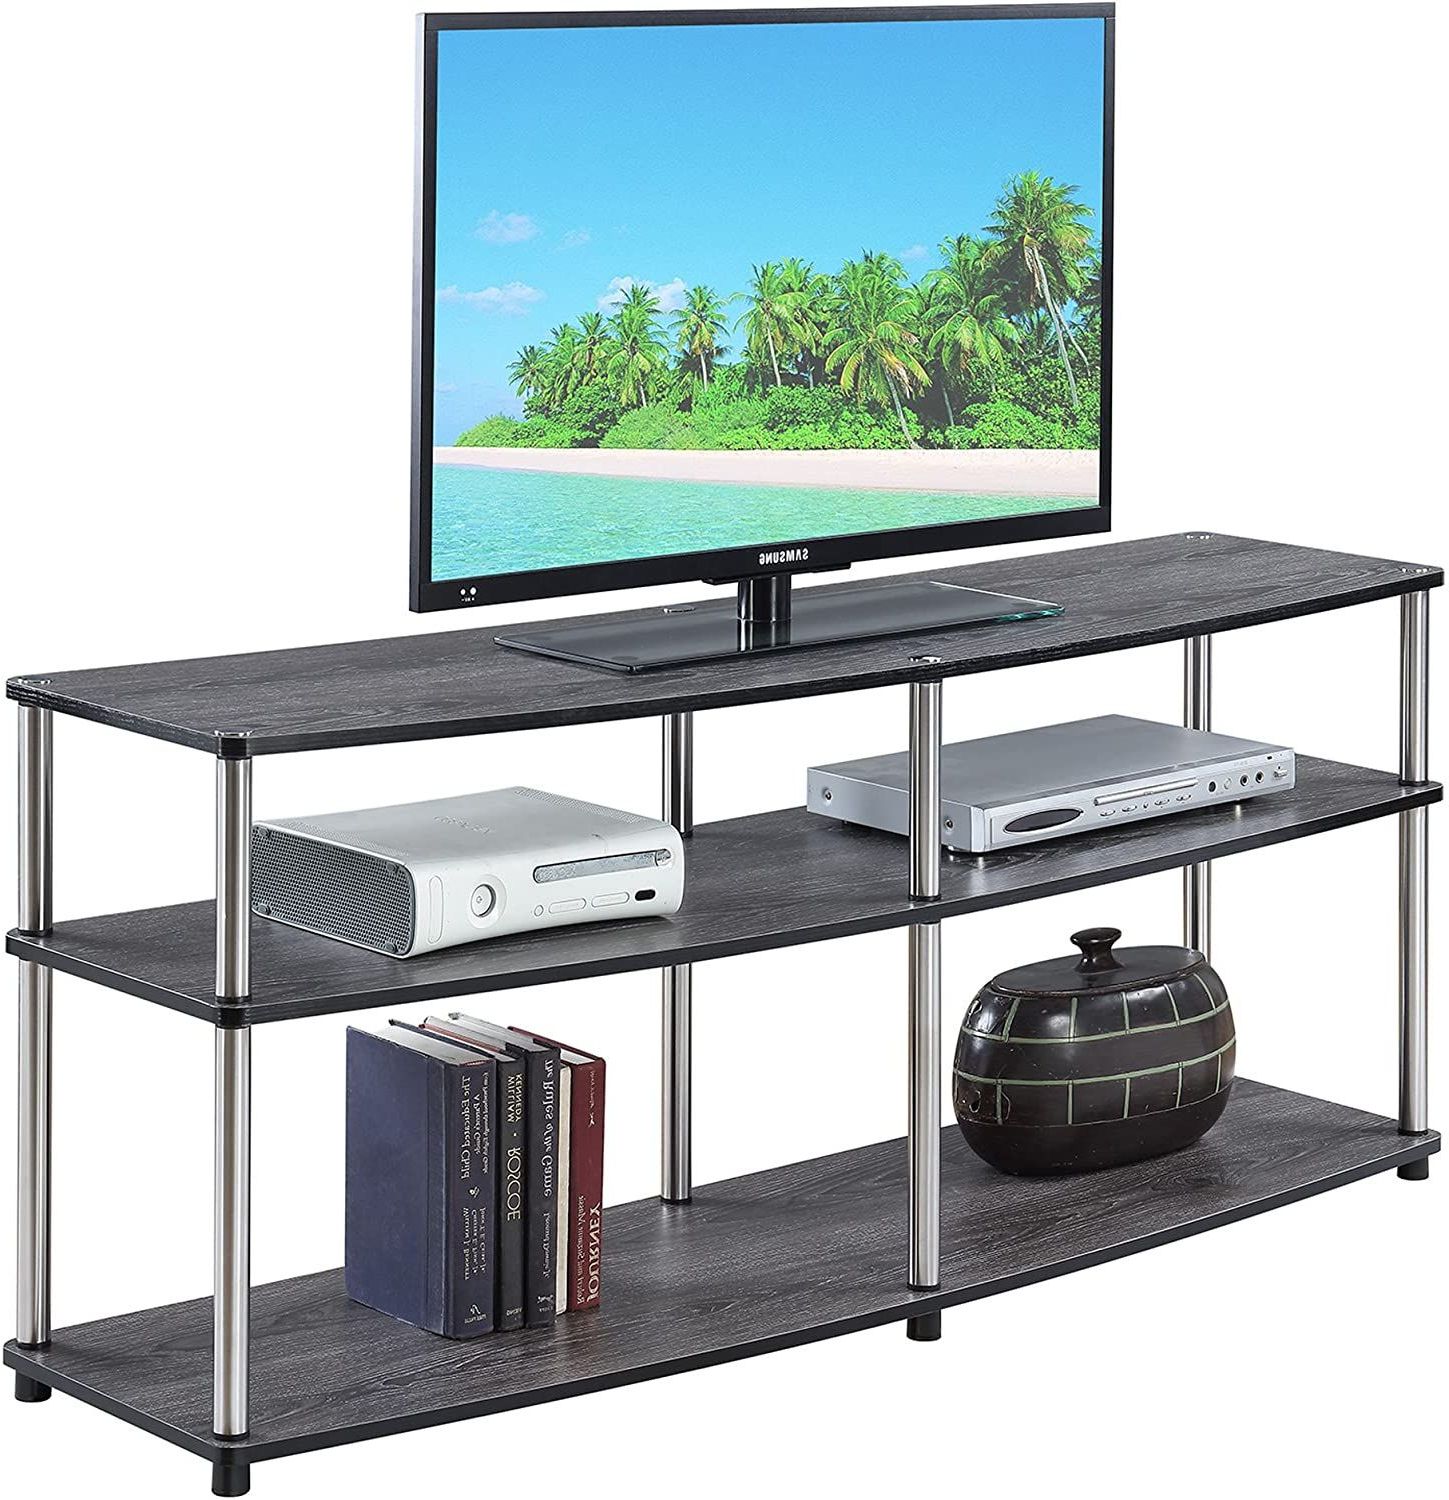 Popular Convenience Concepts Designs2go 3 Tier 60" Tv Stand Throughout Zena Corner Tv Stands (View 10 of 10)